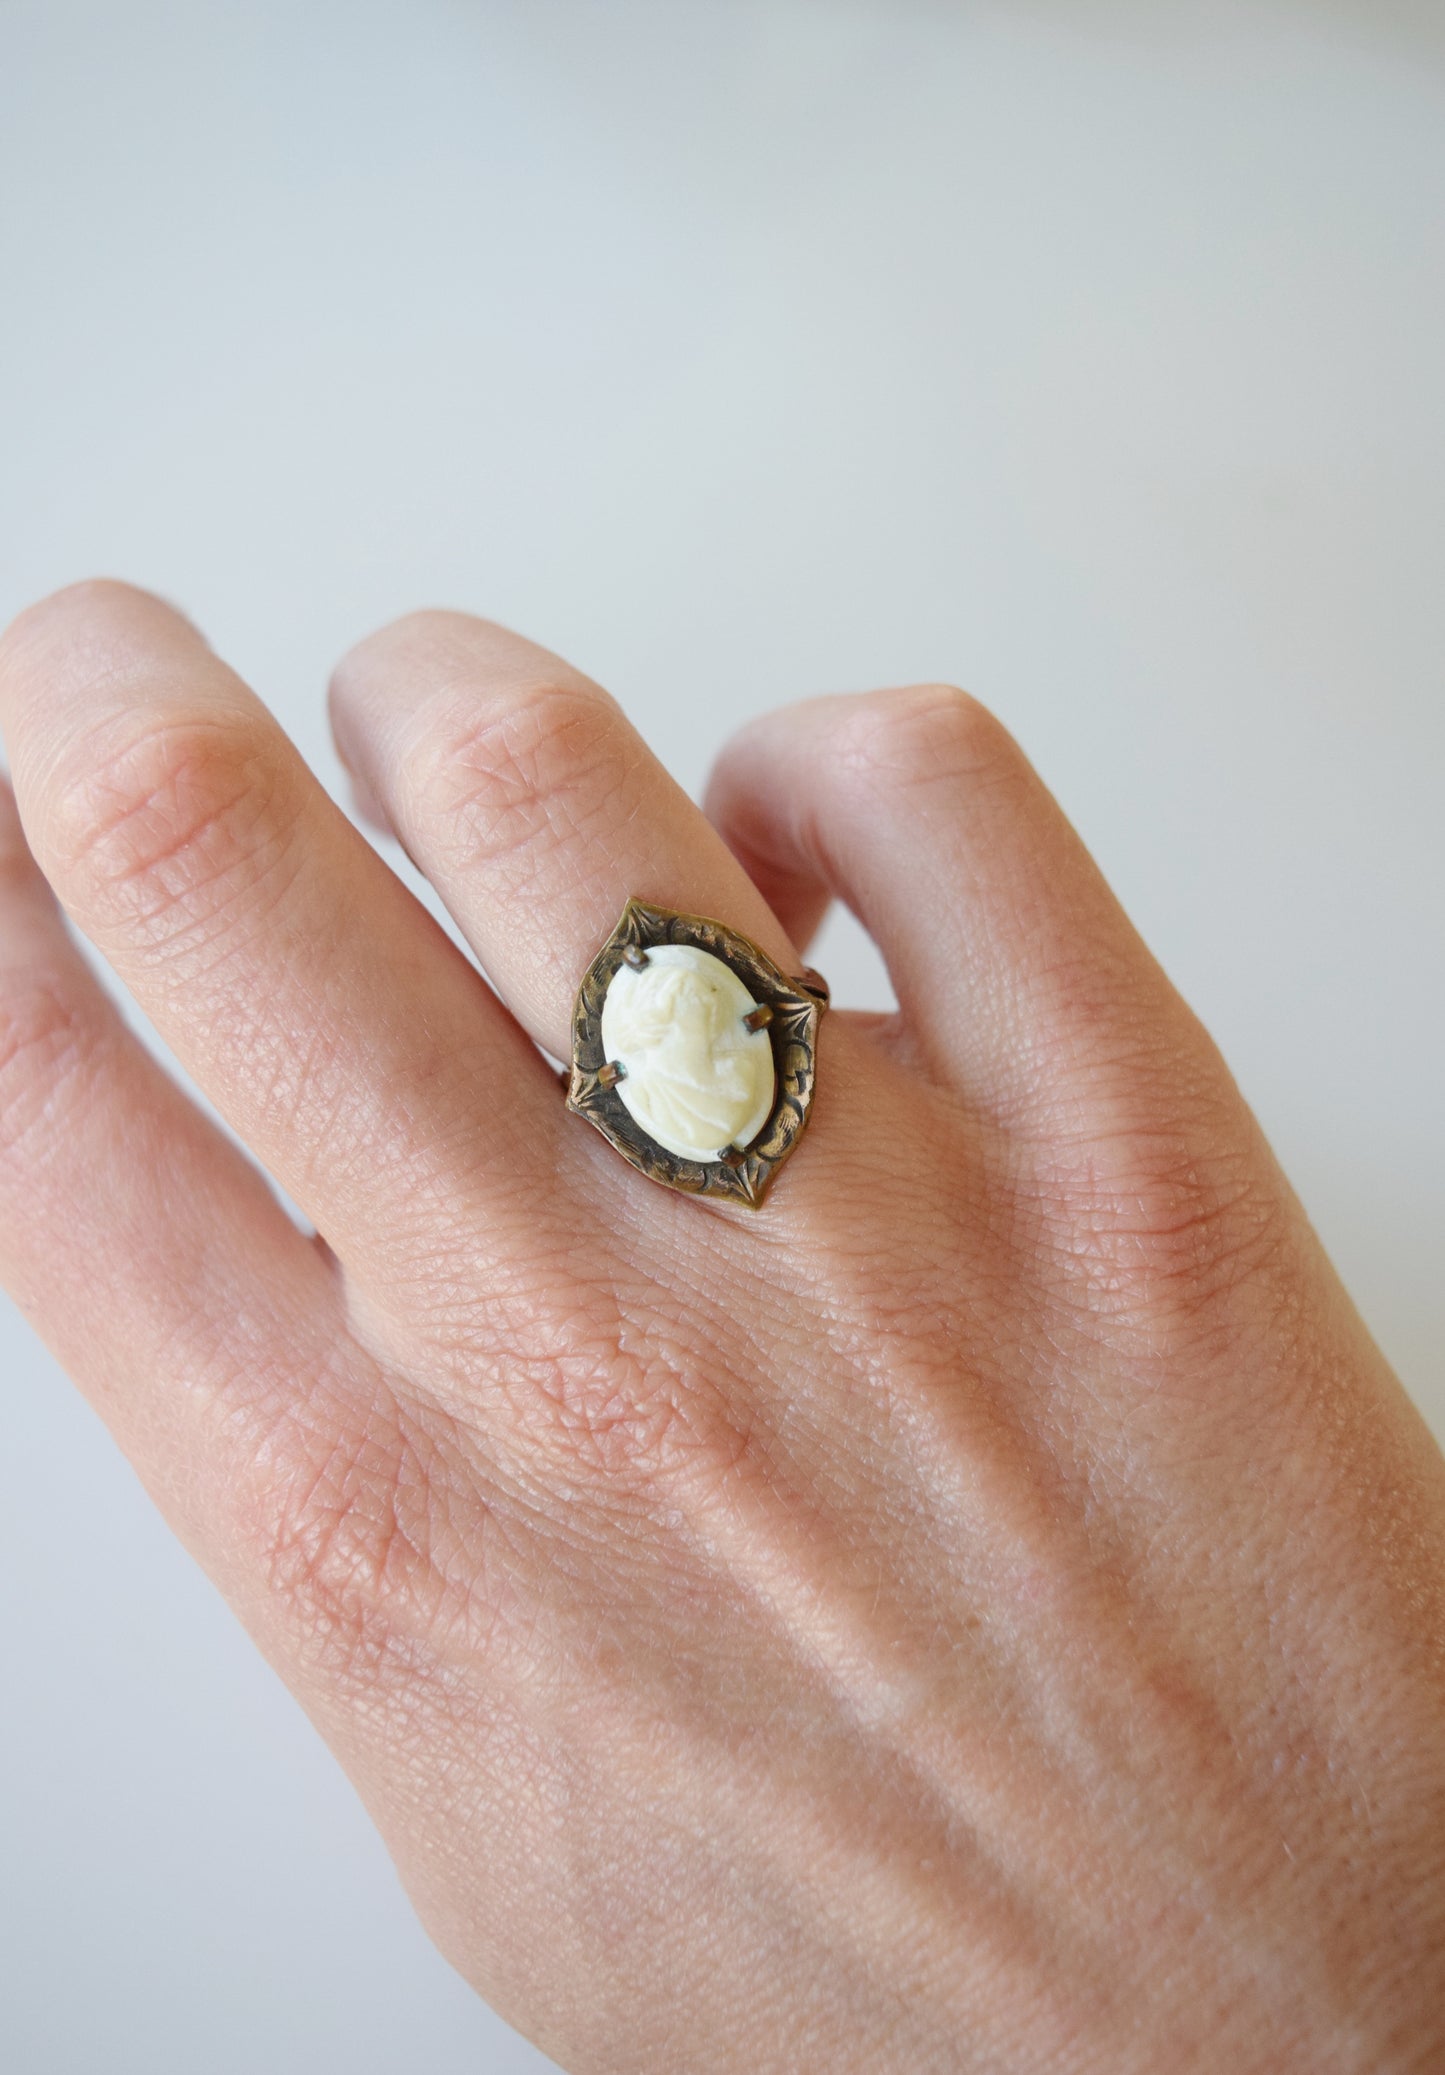 1930s Victorian Revival Cameo Ring